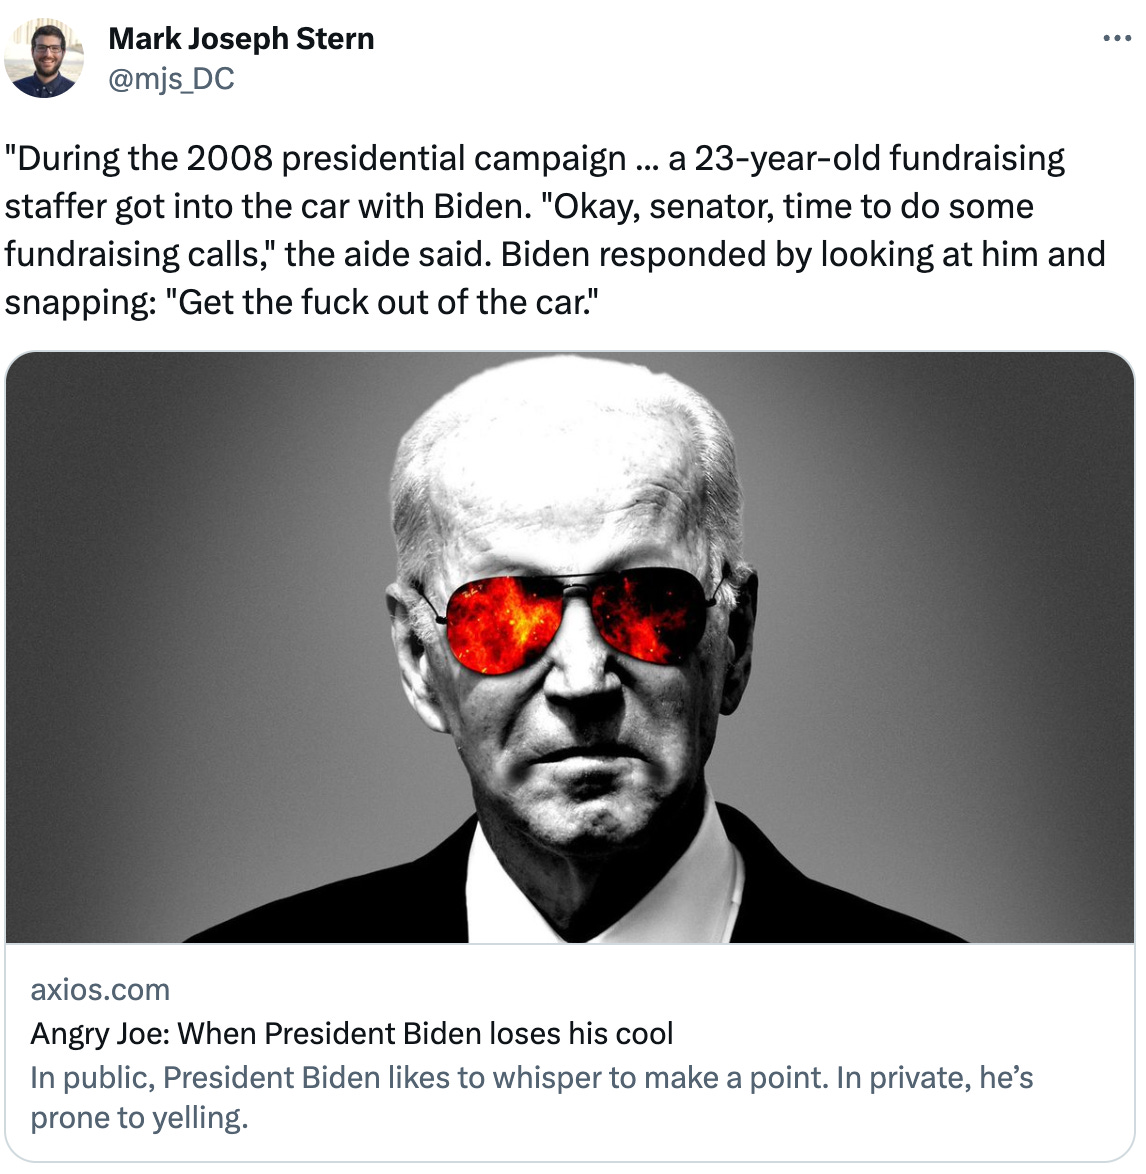  See new Tweets Conversation Mark Joseph Stern @mjs_DC "During the 2008 presidential campaign ... a 23-year-old fundraising staffer got into the car with Biden. "Okay, senator, time to do some fundraising calls," the aide said. Biden responded by looking at him and snapping: "Get the fuck out of the car." axios.com Angry Joe: When President Biden loses his cool In public, President Biden likes to whisper to make a point. In private, he’s prone to yelling.